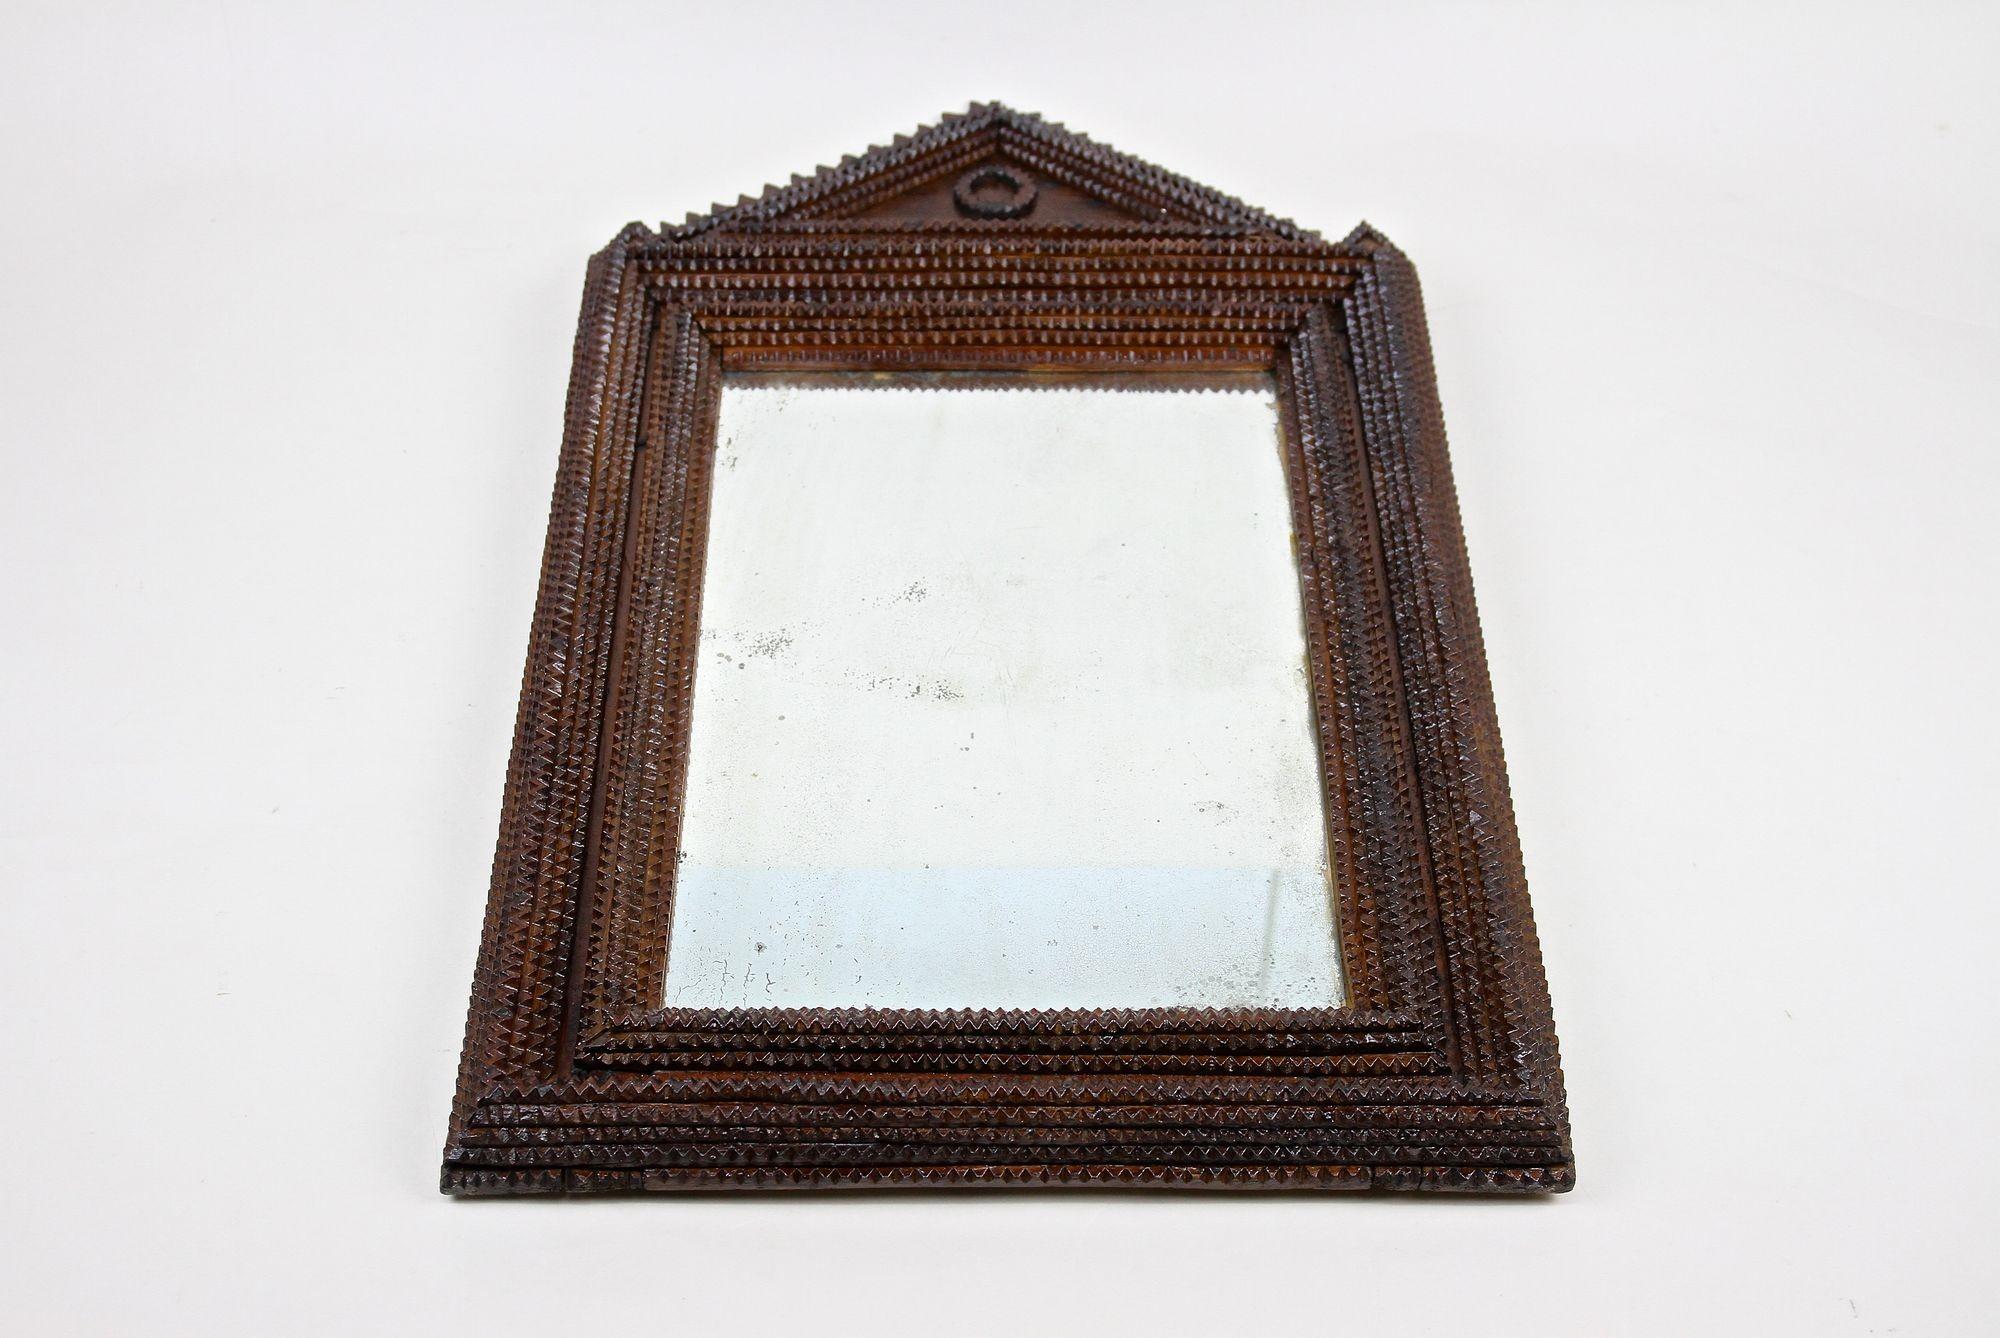 Rustic Tramp Art Wall Mirror With Original Mirror, Handcarved, Austria ca. 1860 For Sale 3